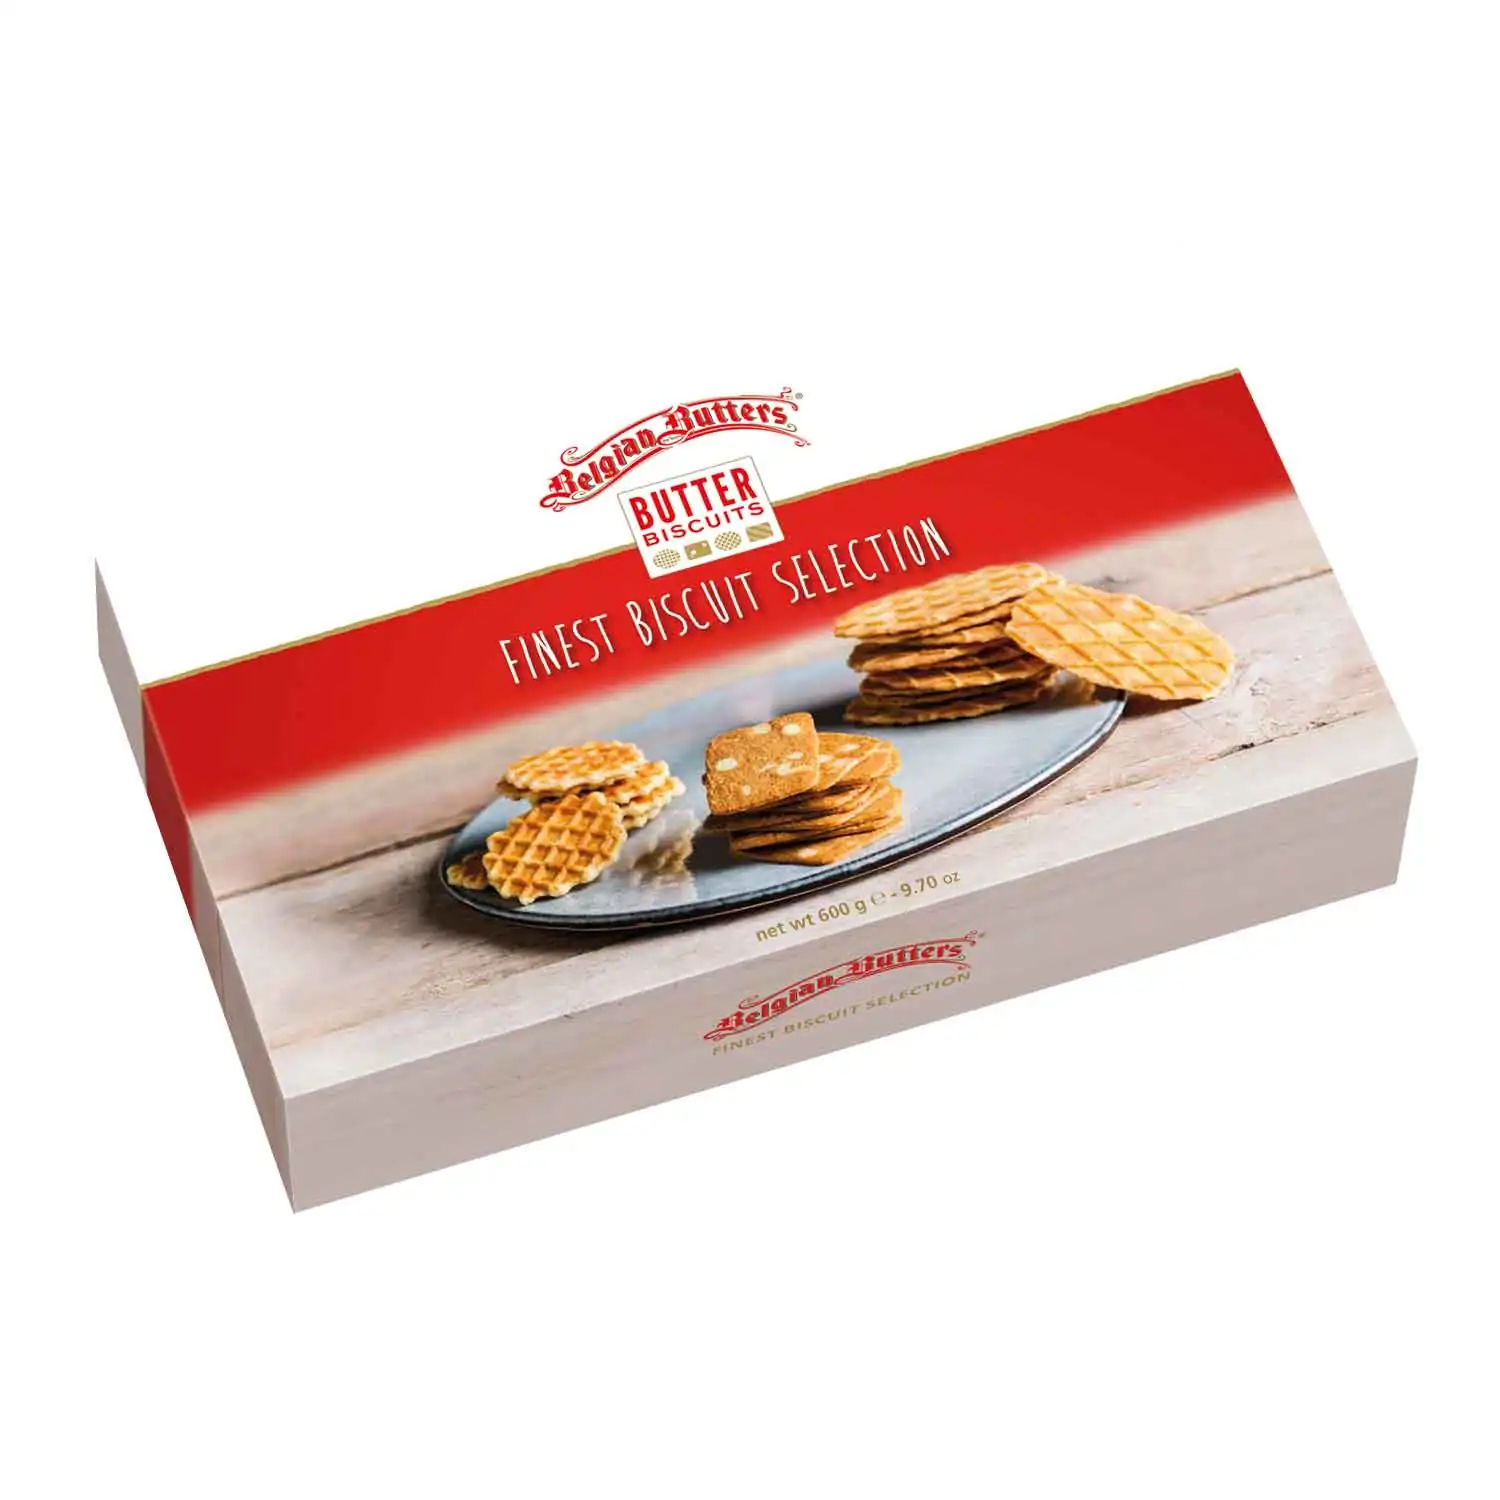 BB biscuit selection 600g - Buy at Real Tobacco